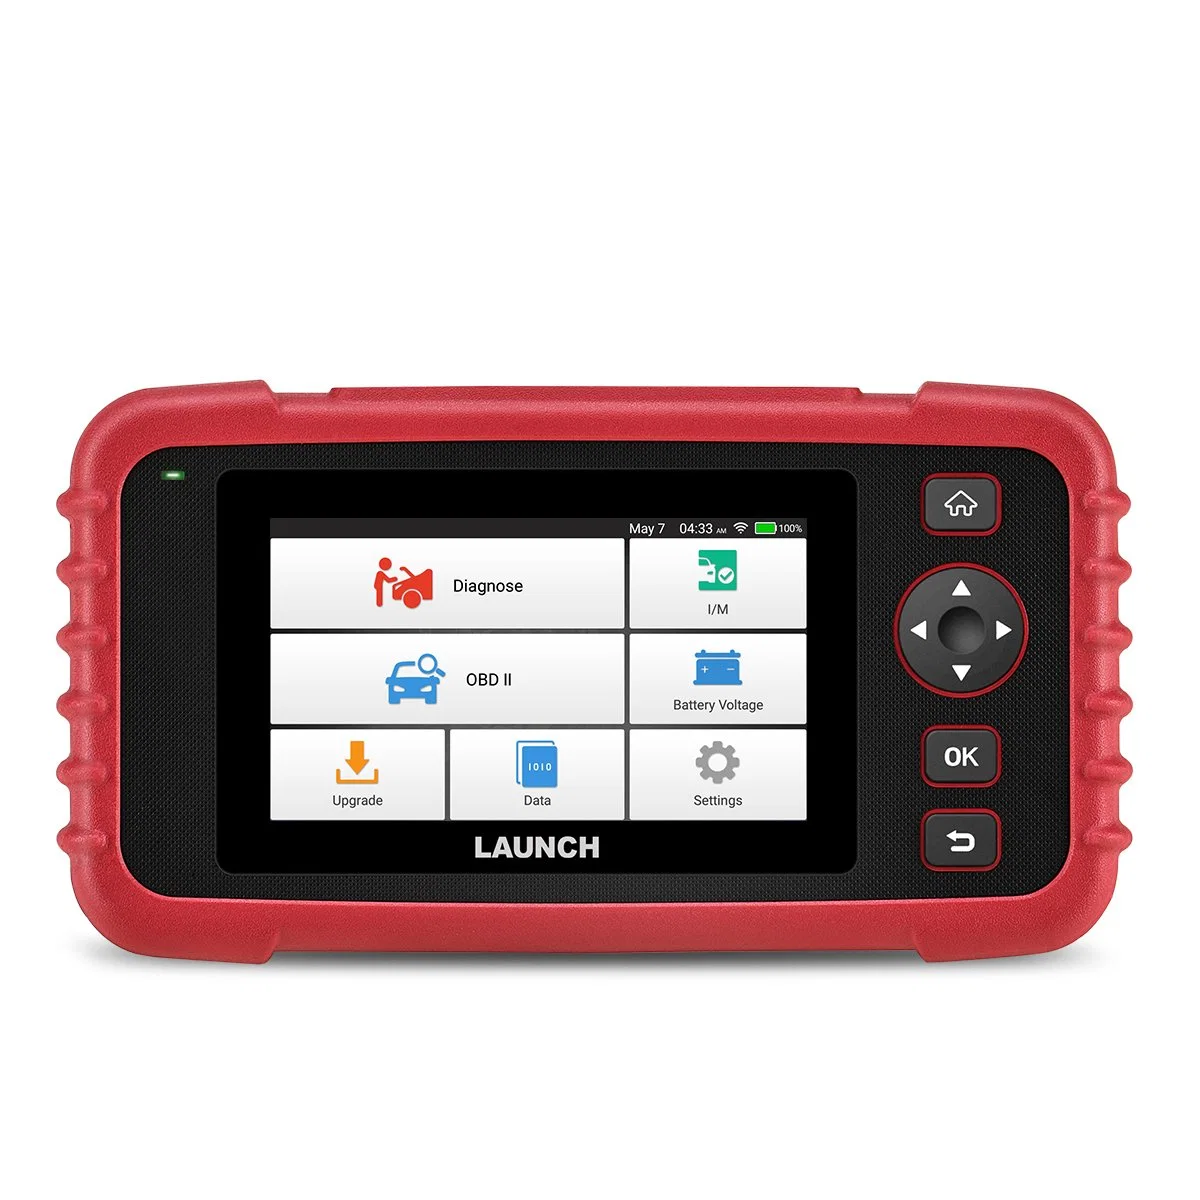 Launch X431 Crp123X OBD2 Scanner Code Reader Car Diagnostic Tool Eng at ABS SRS WiFi Diagnostic Scanner OBD Automotive Launchlaunch X431 Crp123X OBD2 Scanner C